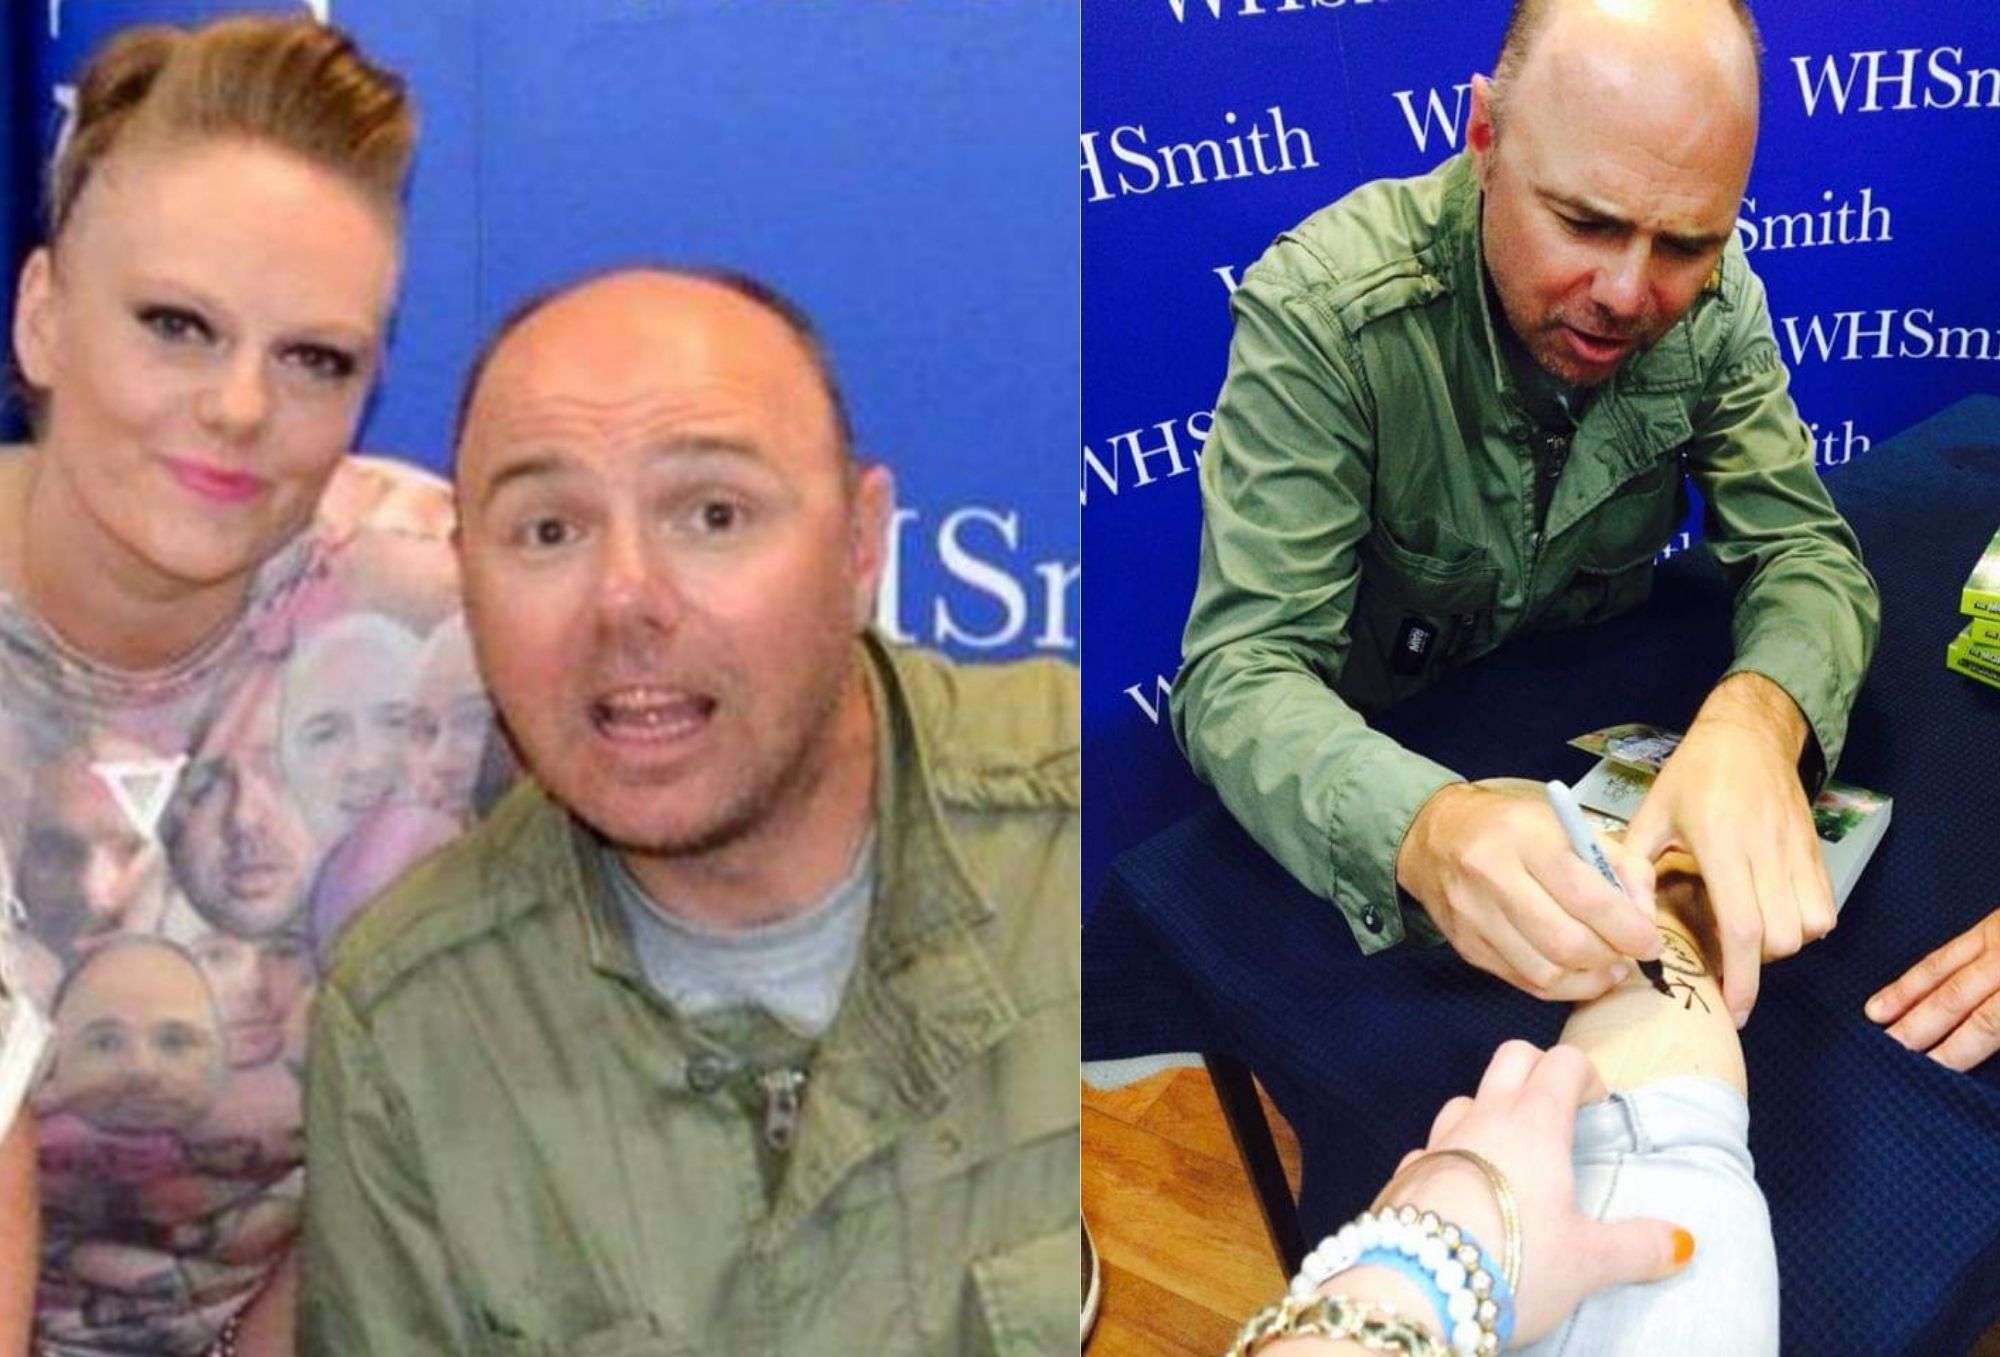 Lauren Hopwood, from Rhosllanerchrugog, met presenter/comedian Karl Pilkington at Manchester 2014: Myself and two friends went to meet Karl at a book-signing and also asked him to sign our tattoos of his face that two of us had done previously. Best